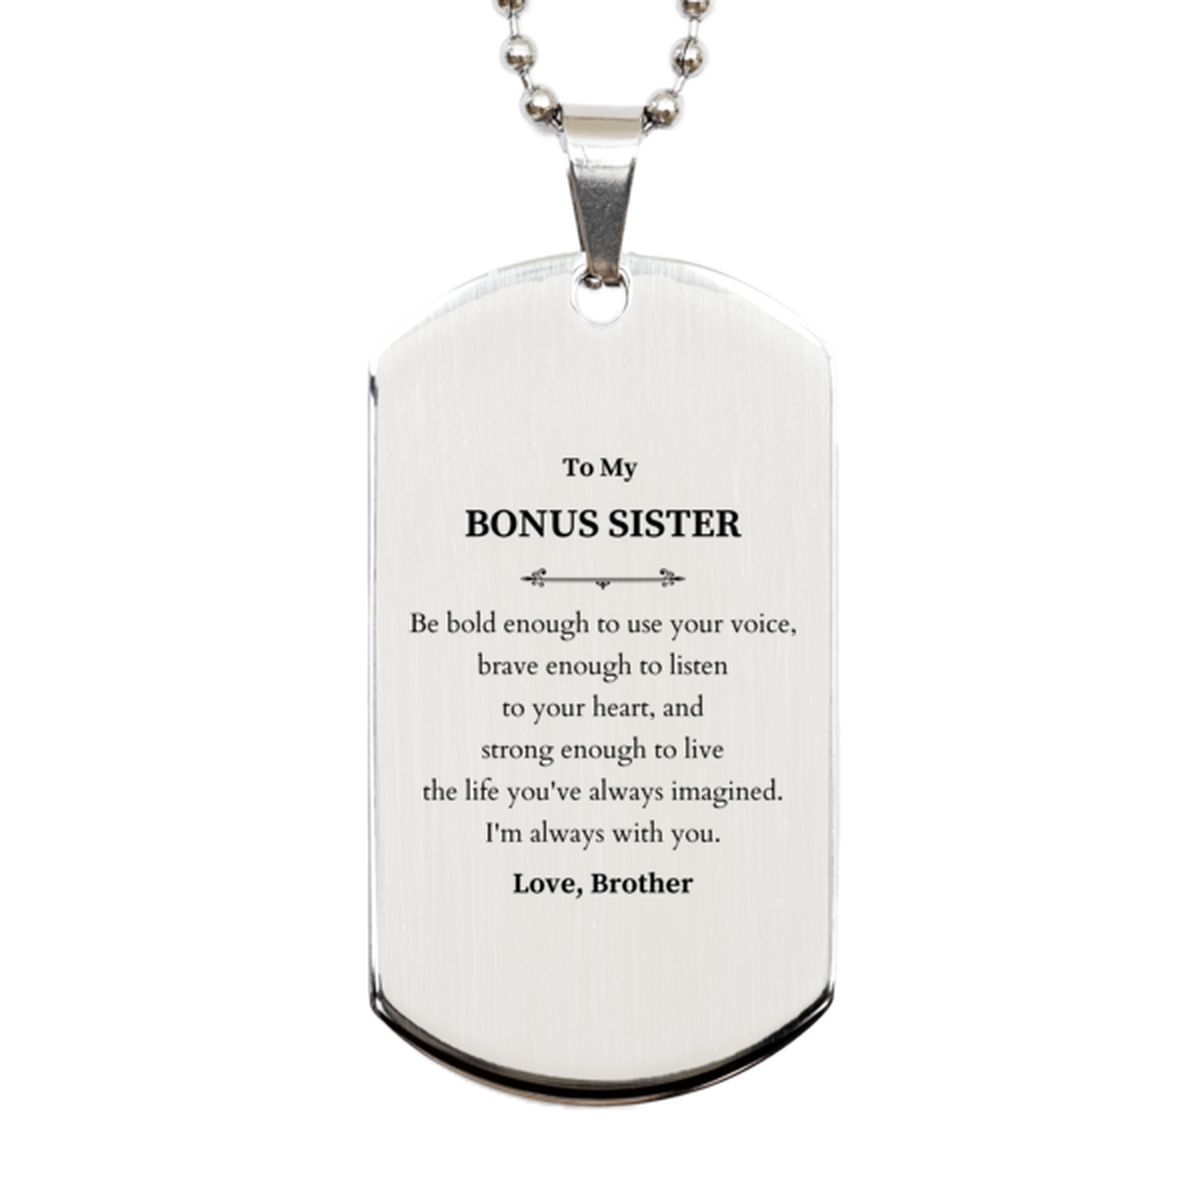 Keepsake Bonus Sister Silver Dog Tag Gift Idea Graduation Christmas Birthday Bonus Sister from Brother, Bonus Sister Be bold enough to use your voice, brave enough to listen to your heart. Love, Brother